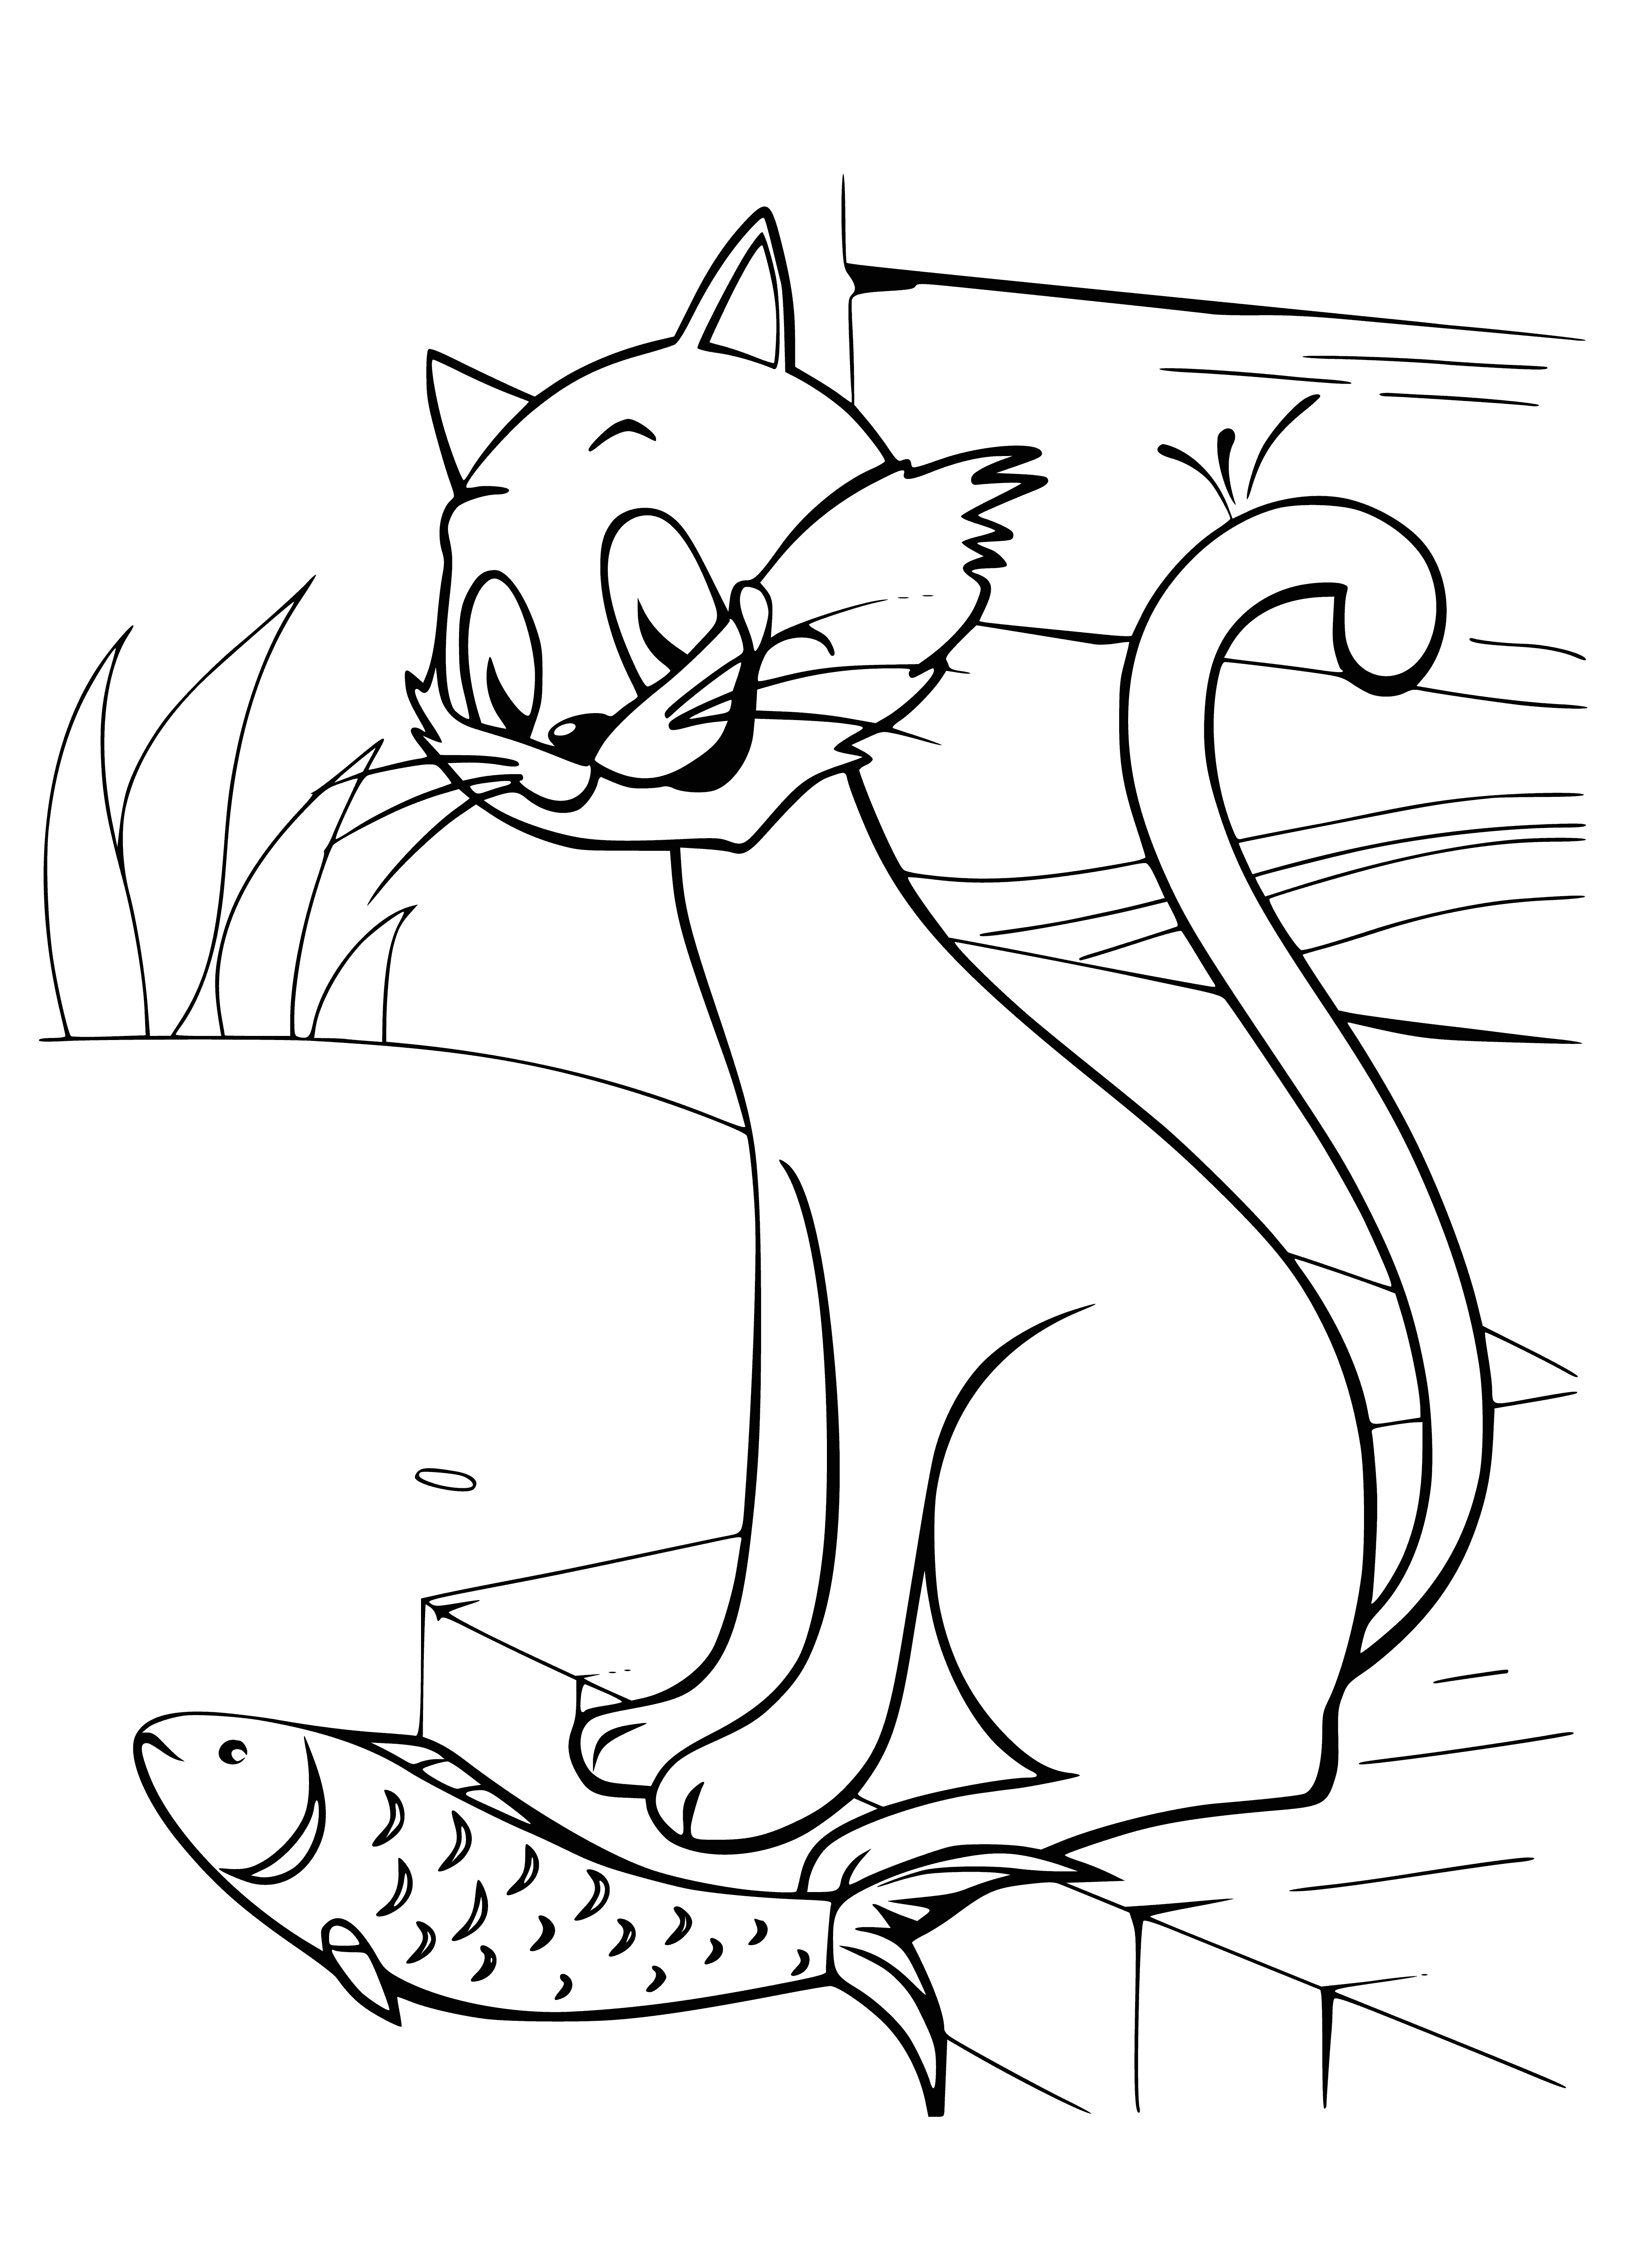 coloring page: Colorful kitten sits in front of bowl of fish, looking at camera with green eyes, white fur with black spots.